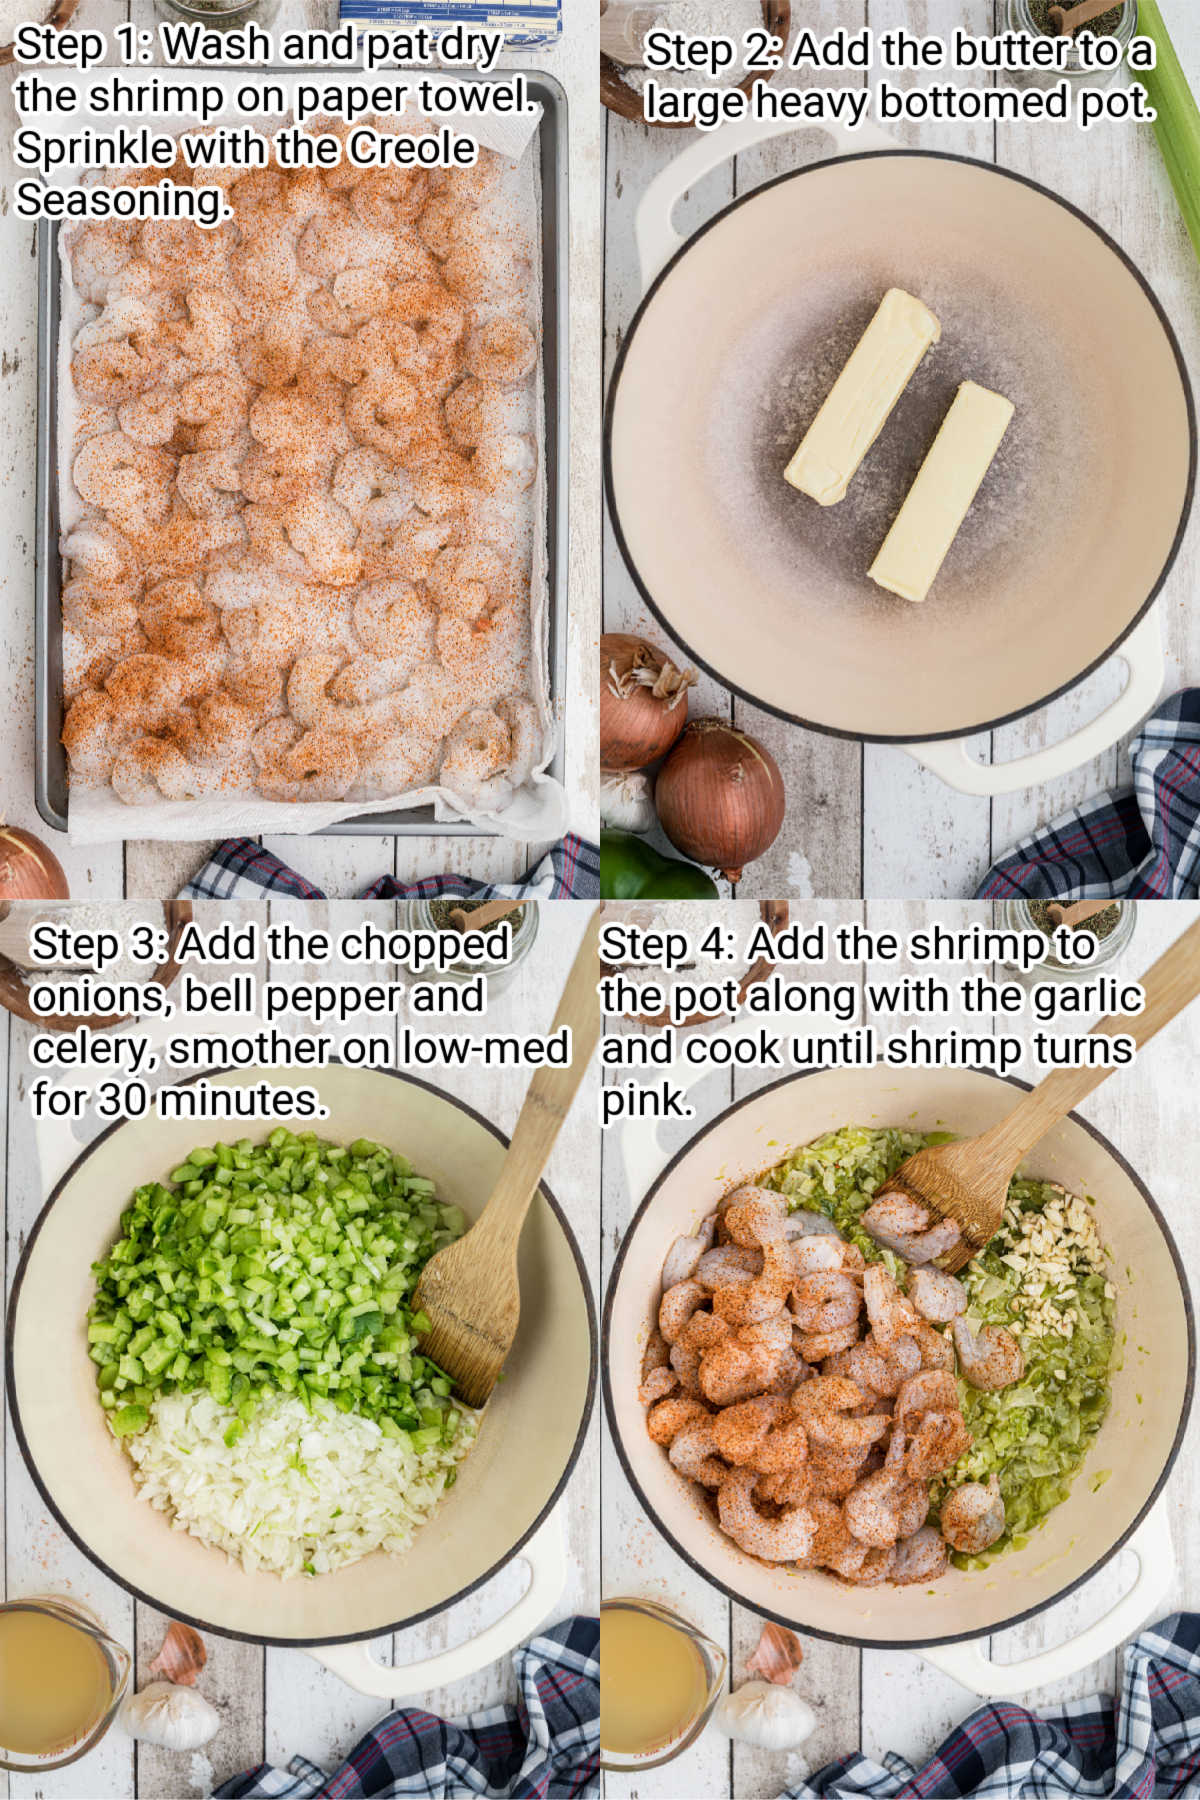 four images showing how to make a shrimp etouffee